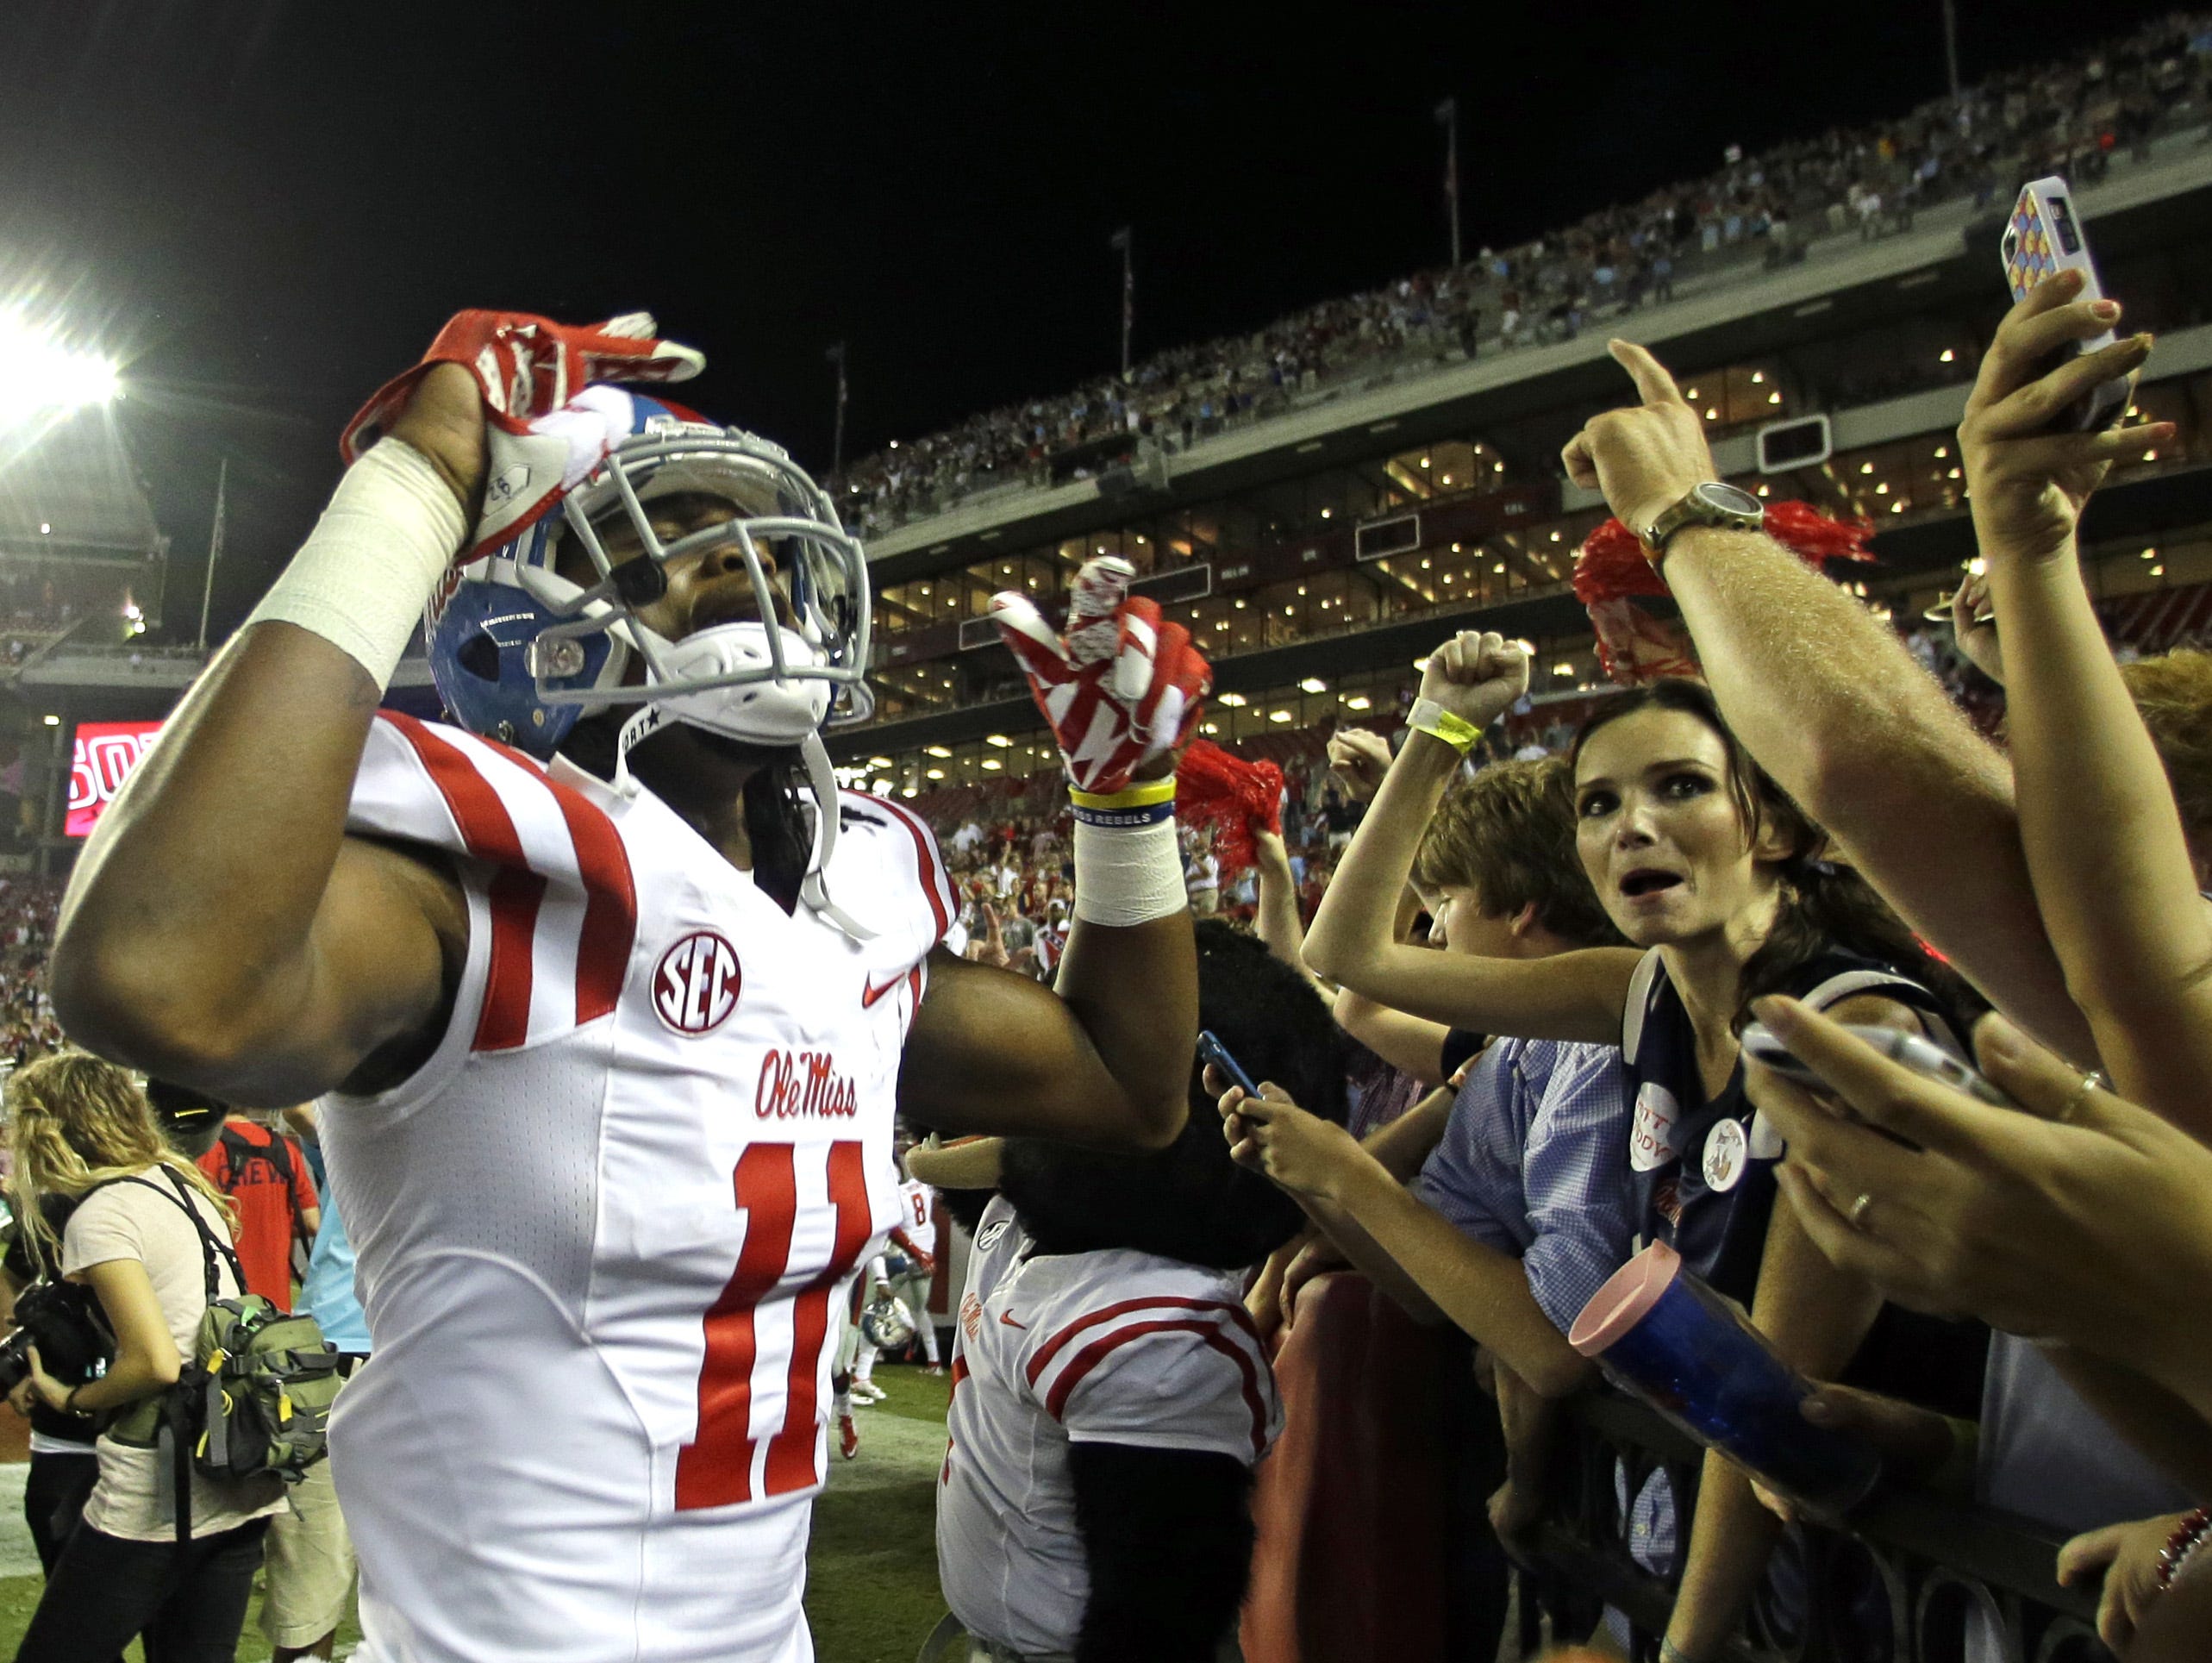 Ole Miss receiver Markell Pack celebrates with a group of fans Saturday night after the Rebels defeated Alabama 43-37 in Tuscaloosa. Mississippi wide receiver Markell Pack (11) celebrates with fans after they defeated Alabama 43-37 during the second half of an NCAA college football game, Sunday, Sept. 20, 2015, in Tuscaloosa, Ala. (AP Photo/Butch Dill)